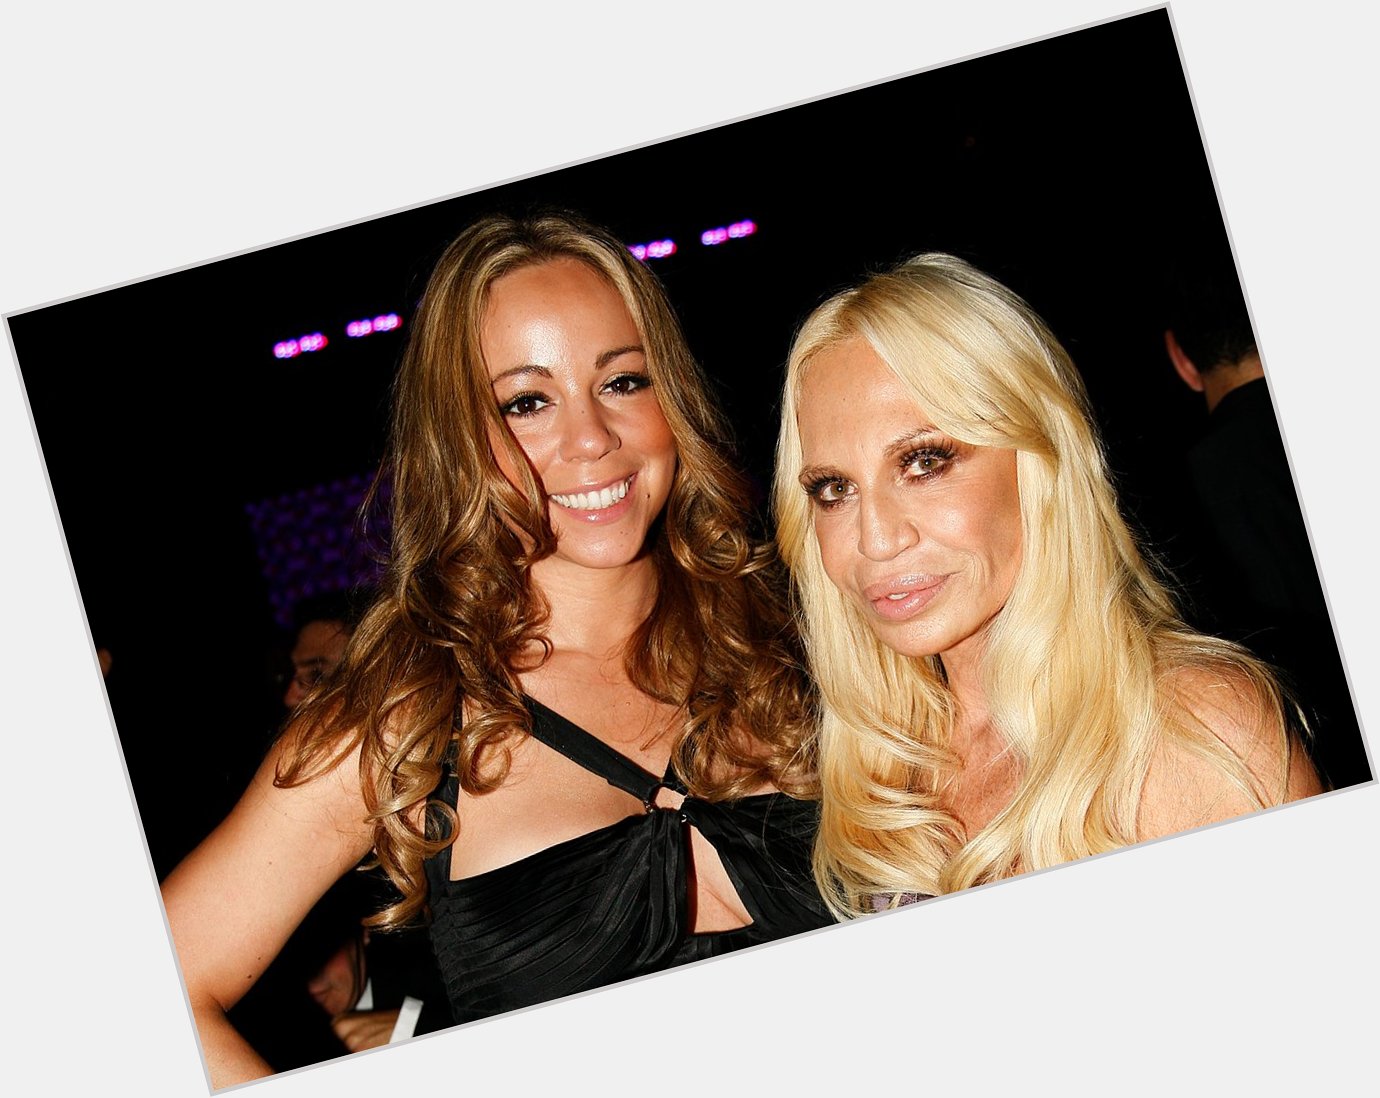 Happy Birthday, Donatella Versace! You make our faves look so good. 